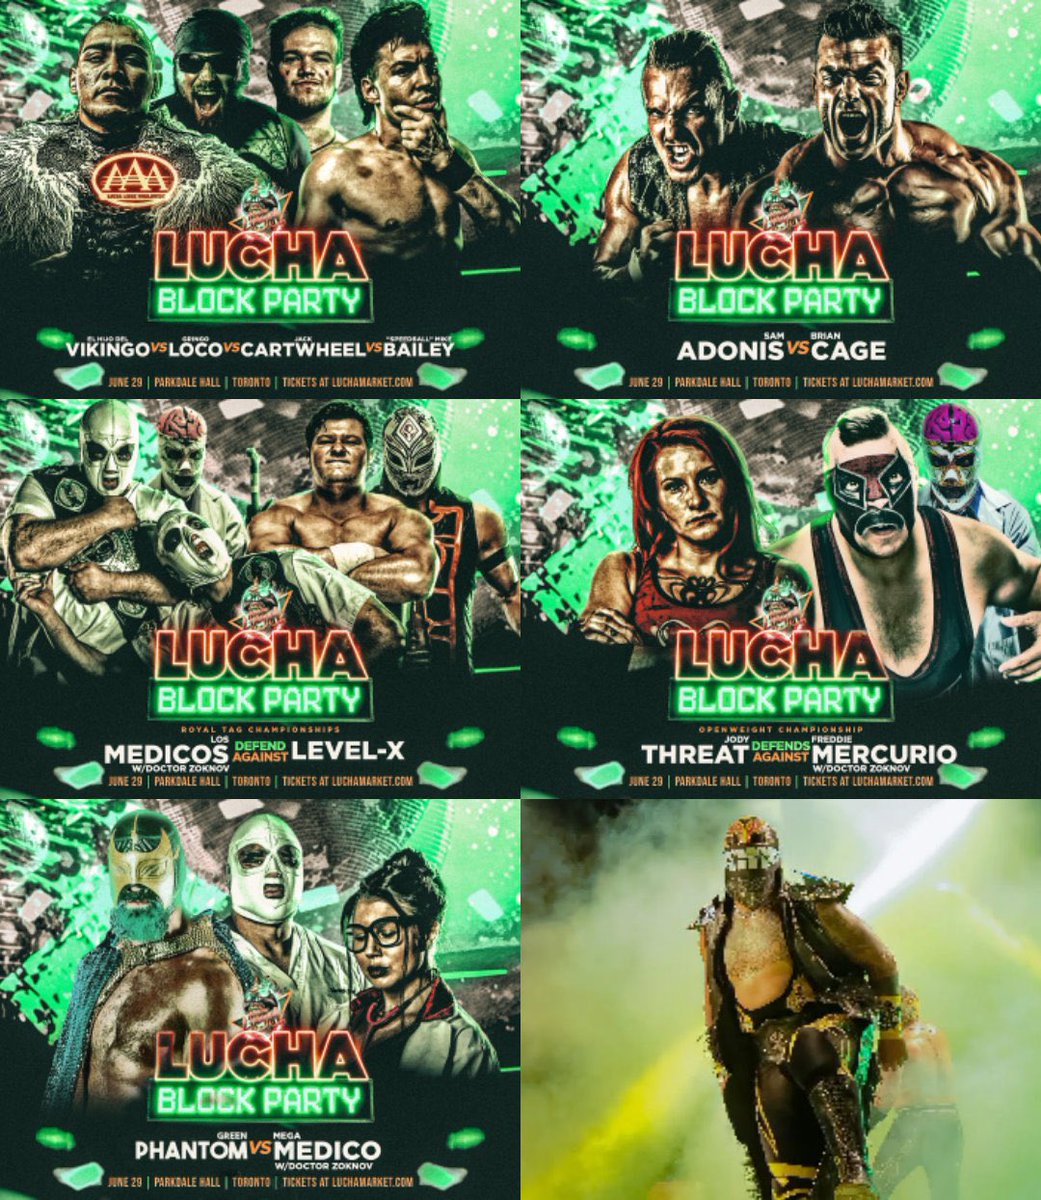 @EdieFranknstien @DemandLucha If you’ve never watched Demand Lucha, this is their next show!

You can catch one of their streams on @indiewrestling if you’re not in the Toronto area.